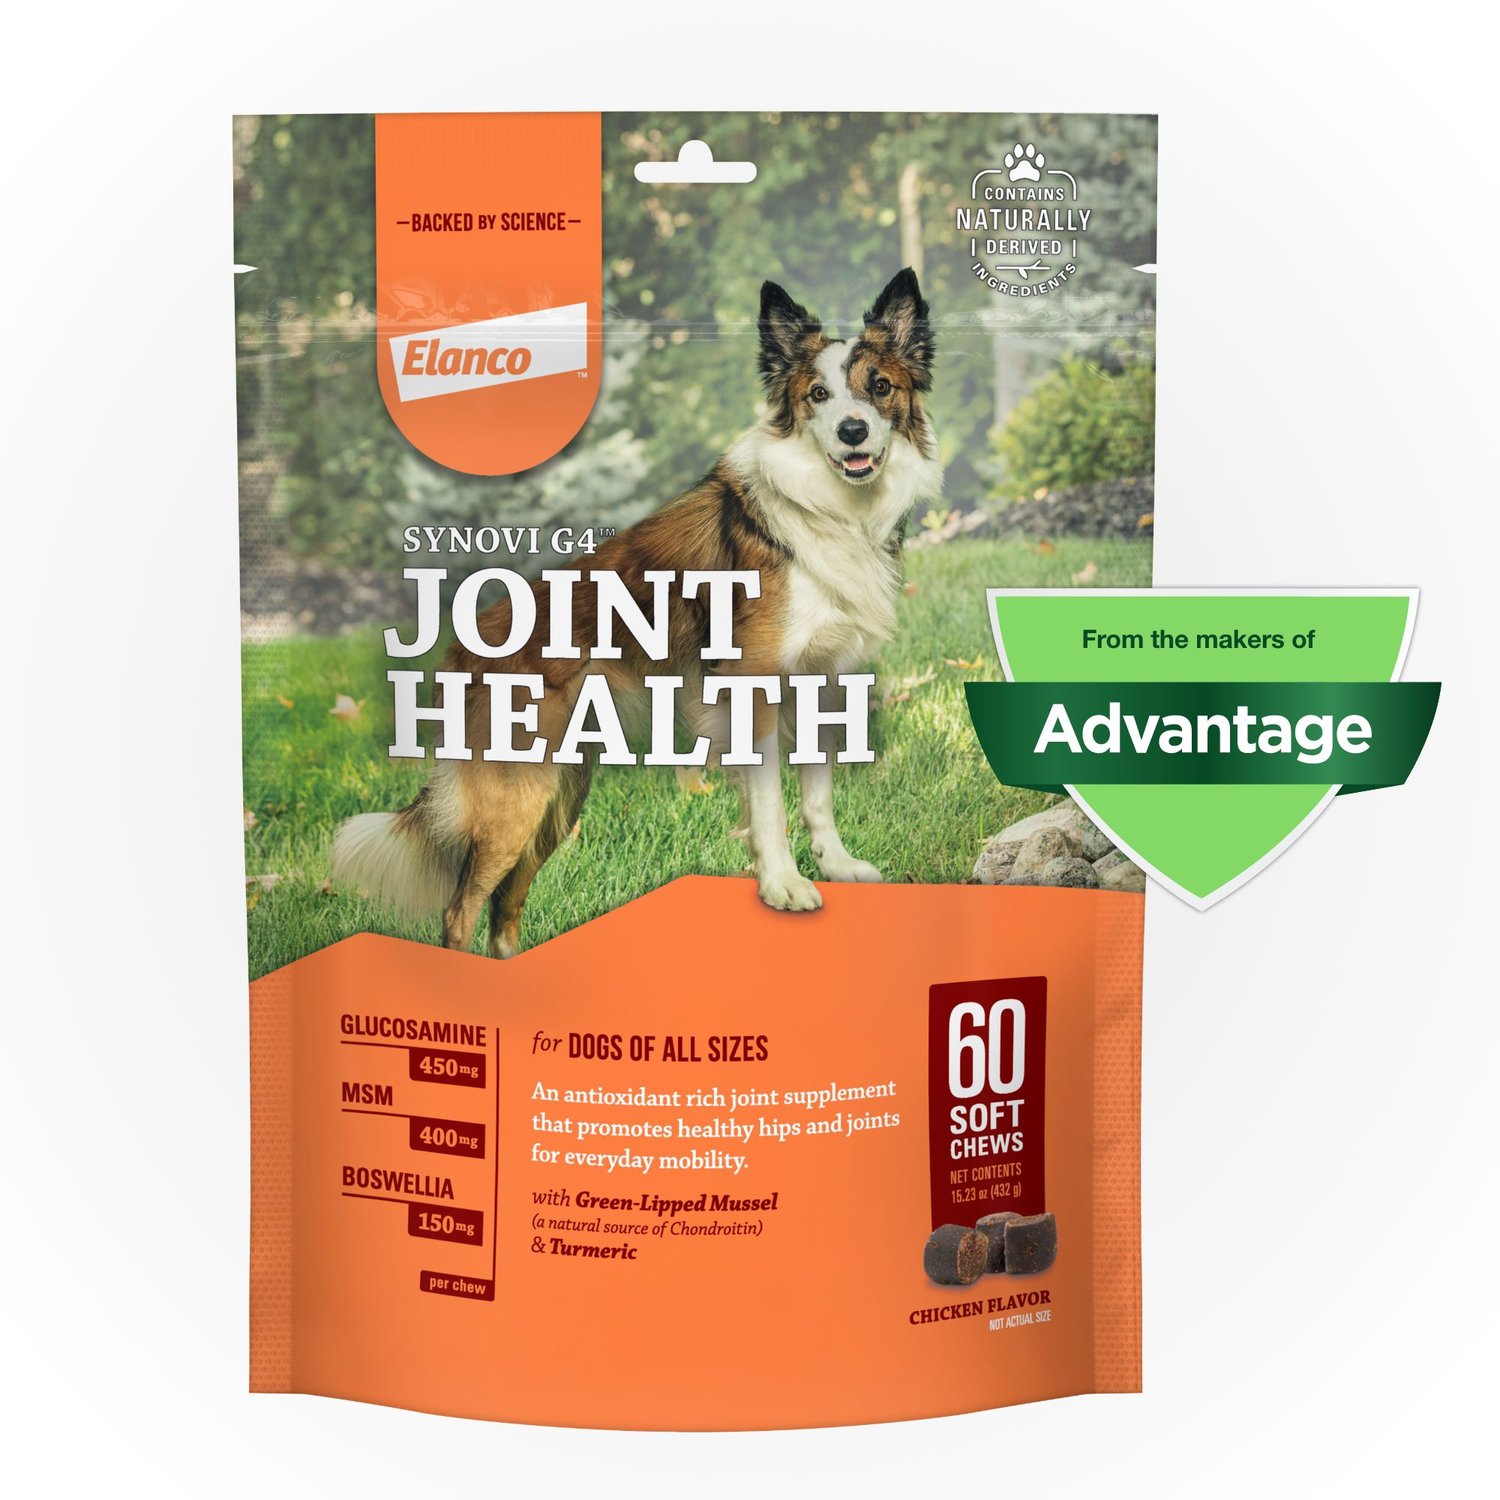 hip and joint chewables for dogs